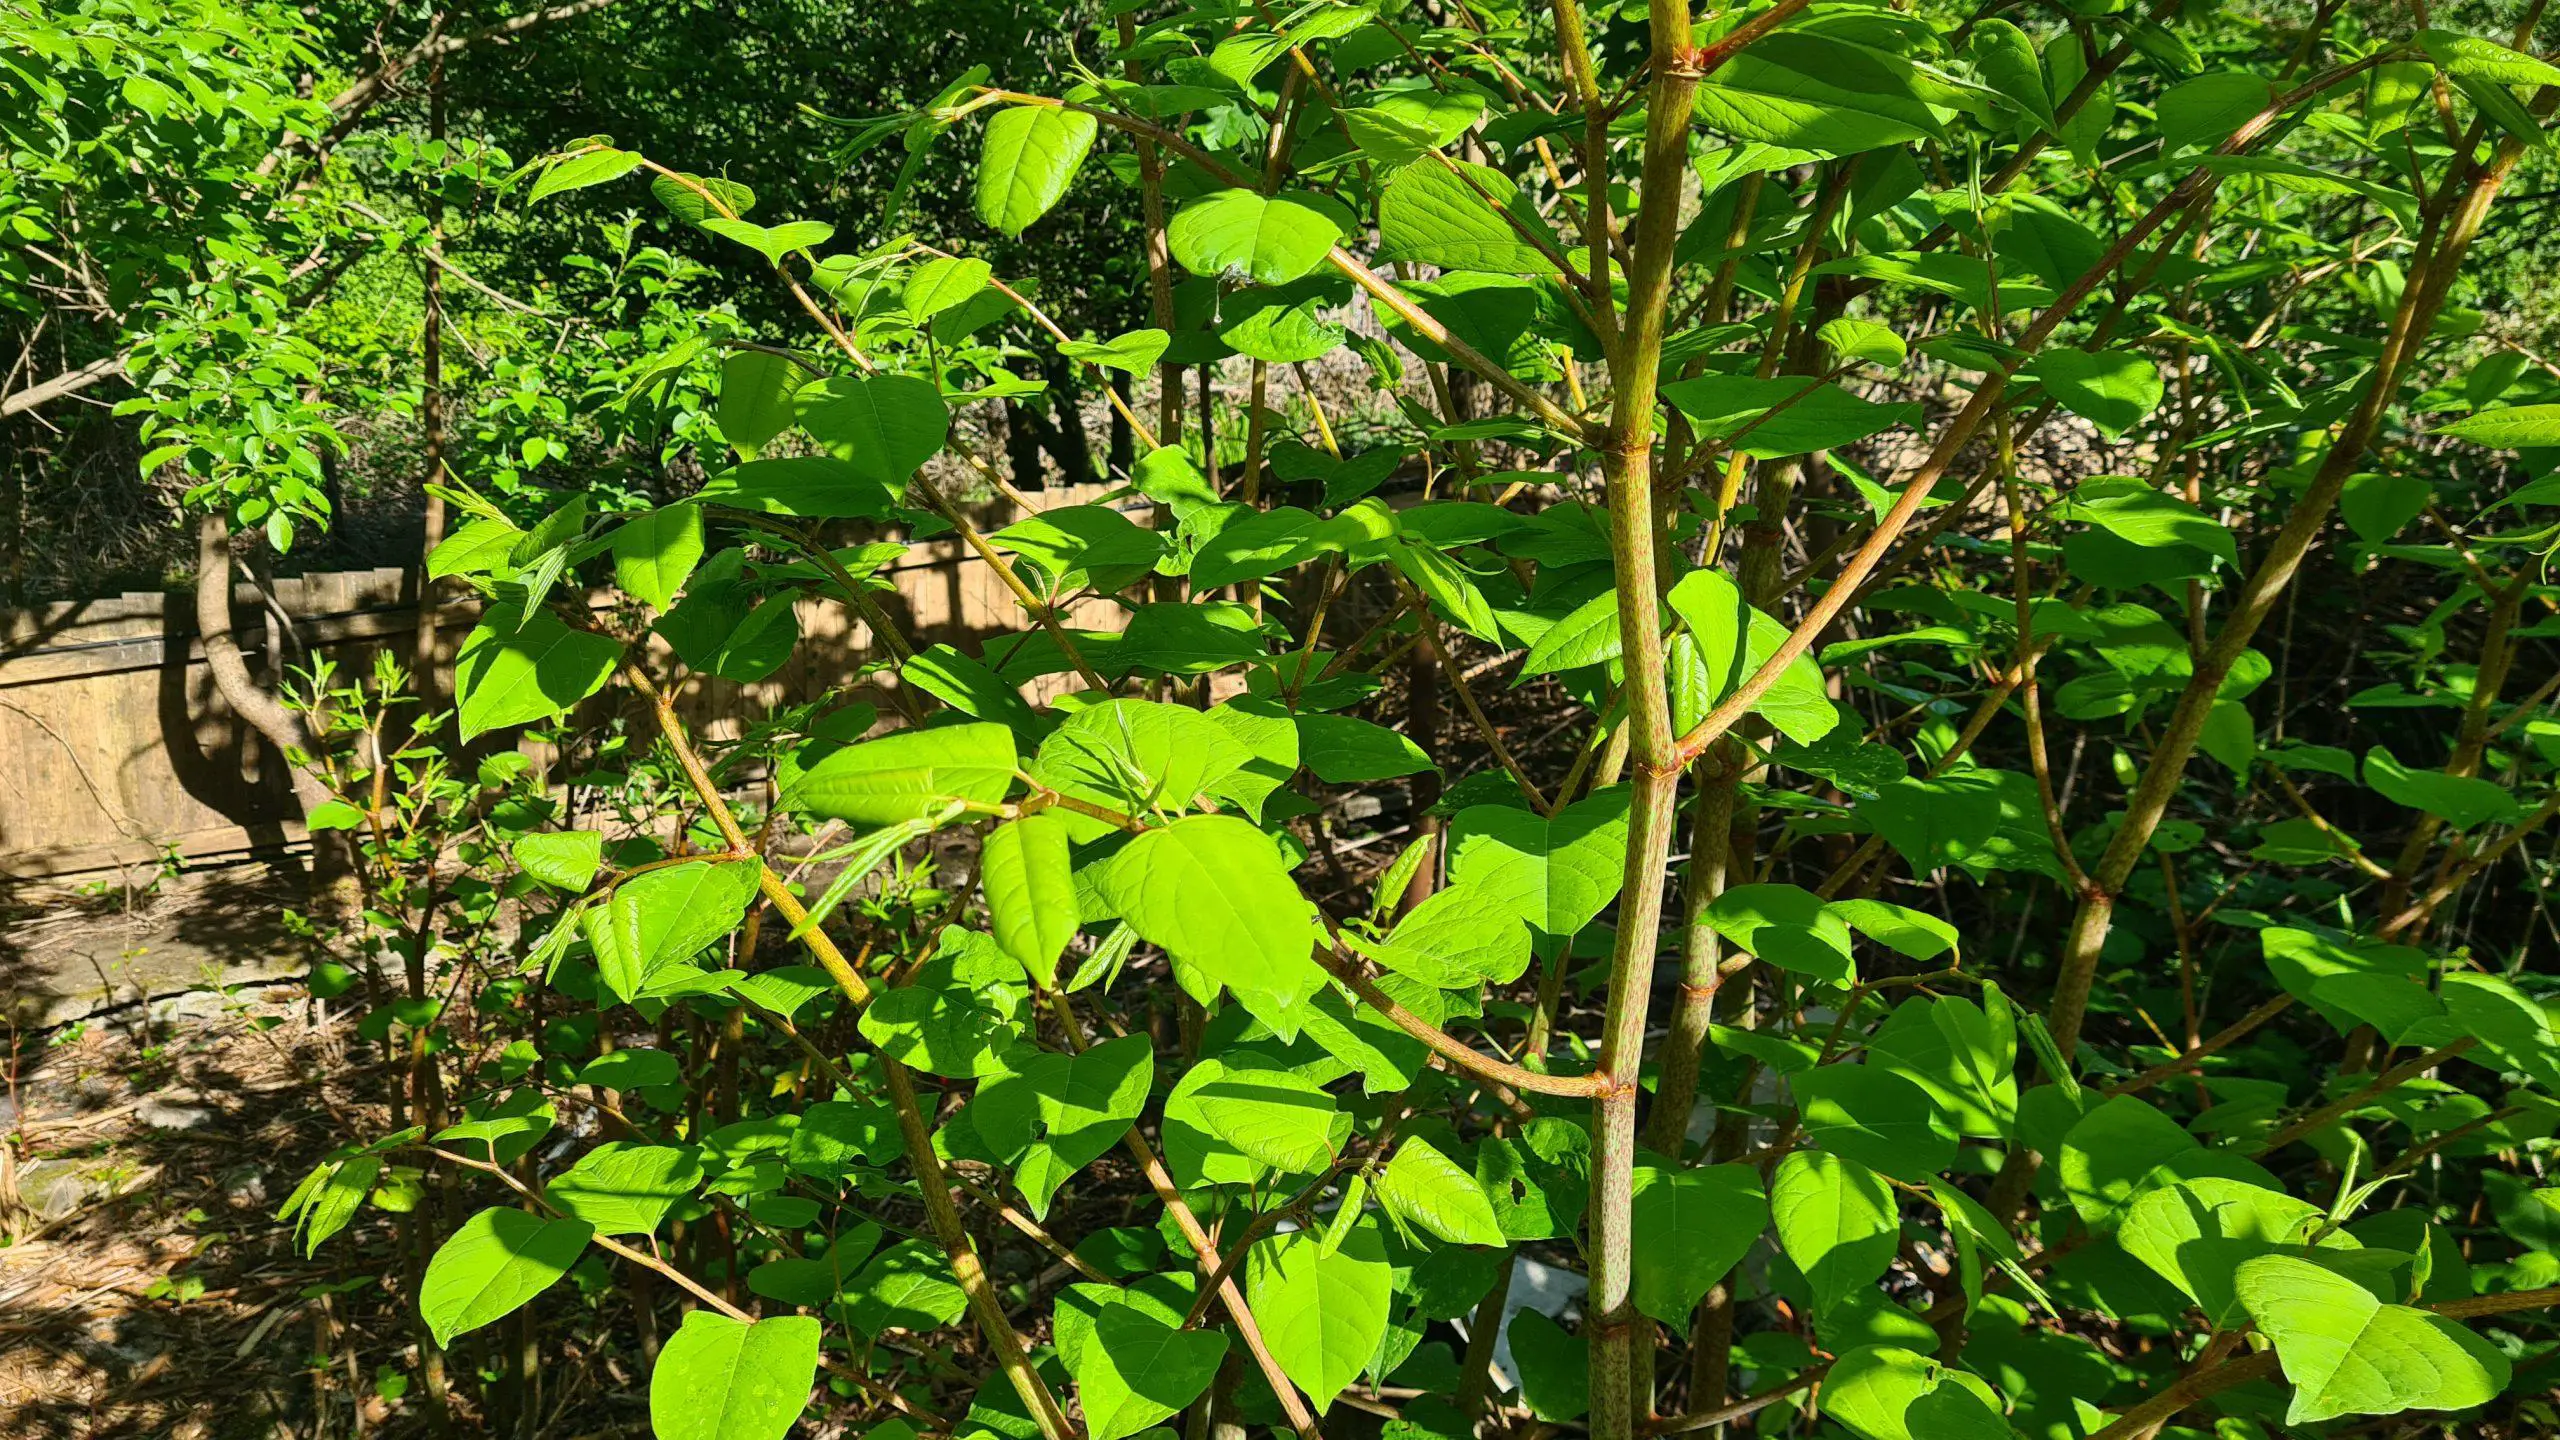 Growth chart of Japanese knotweed spread within the UK and how much of problem it is